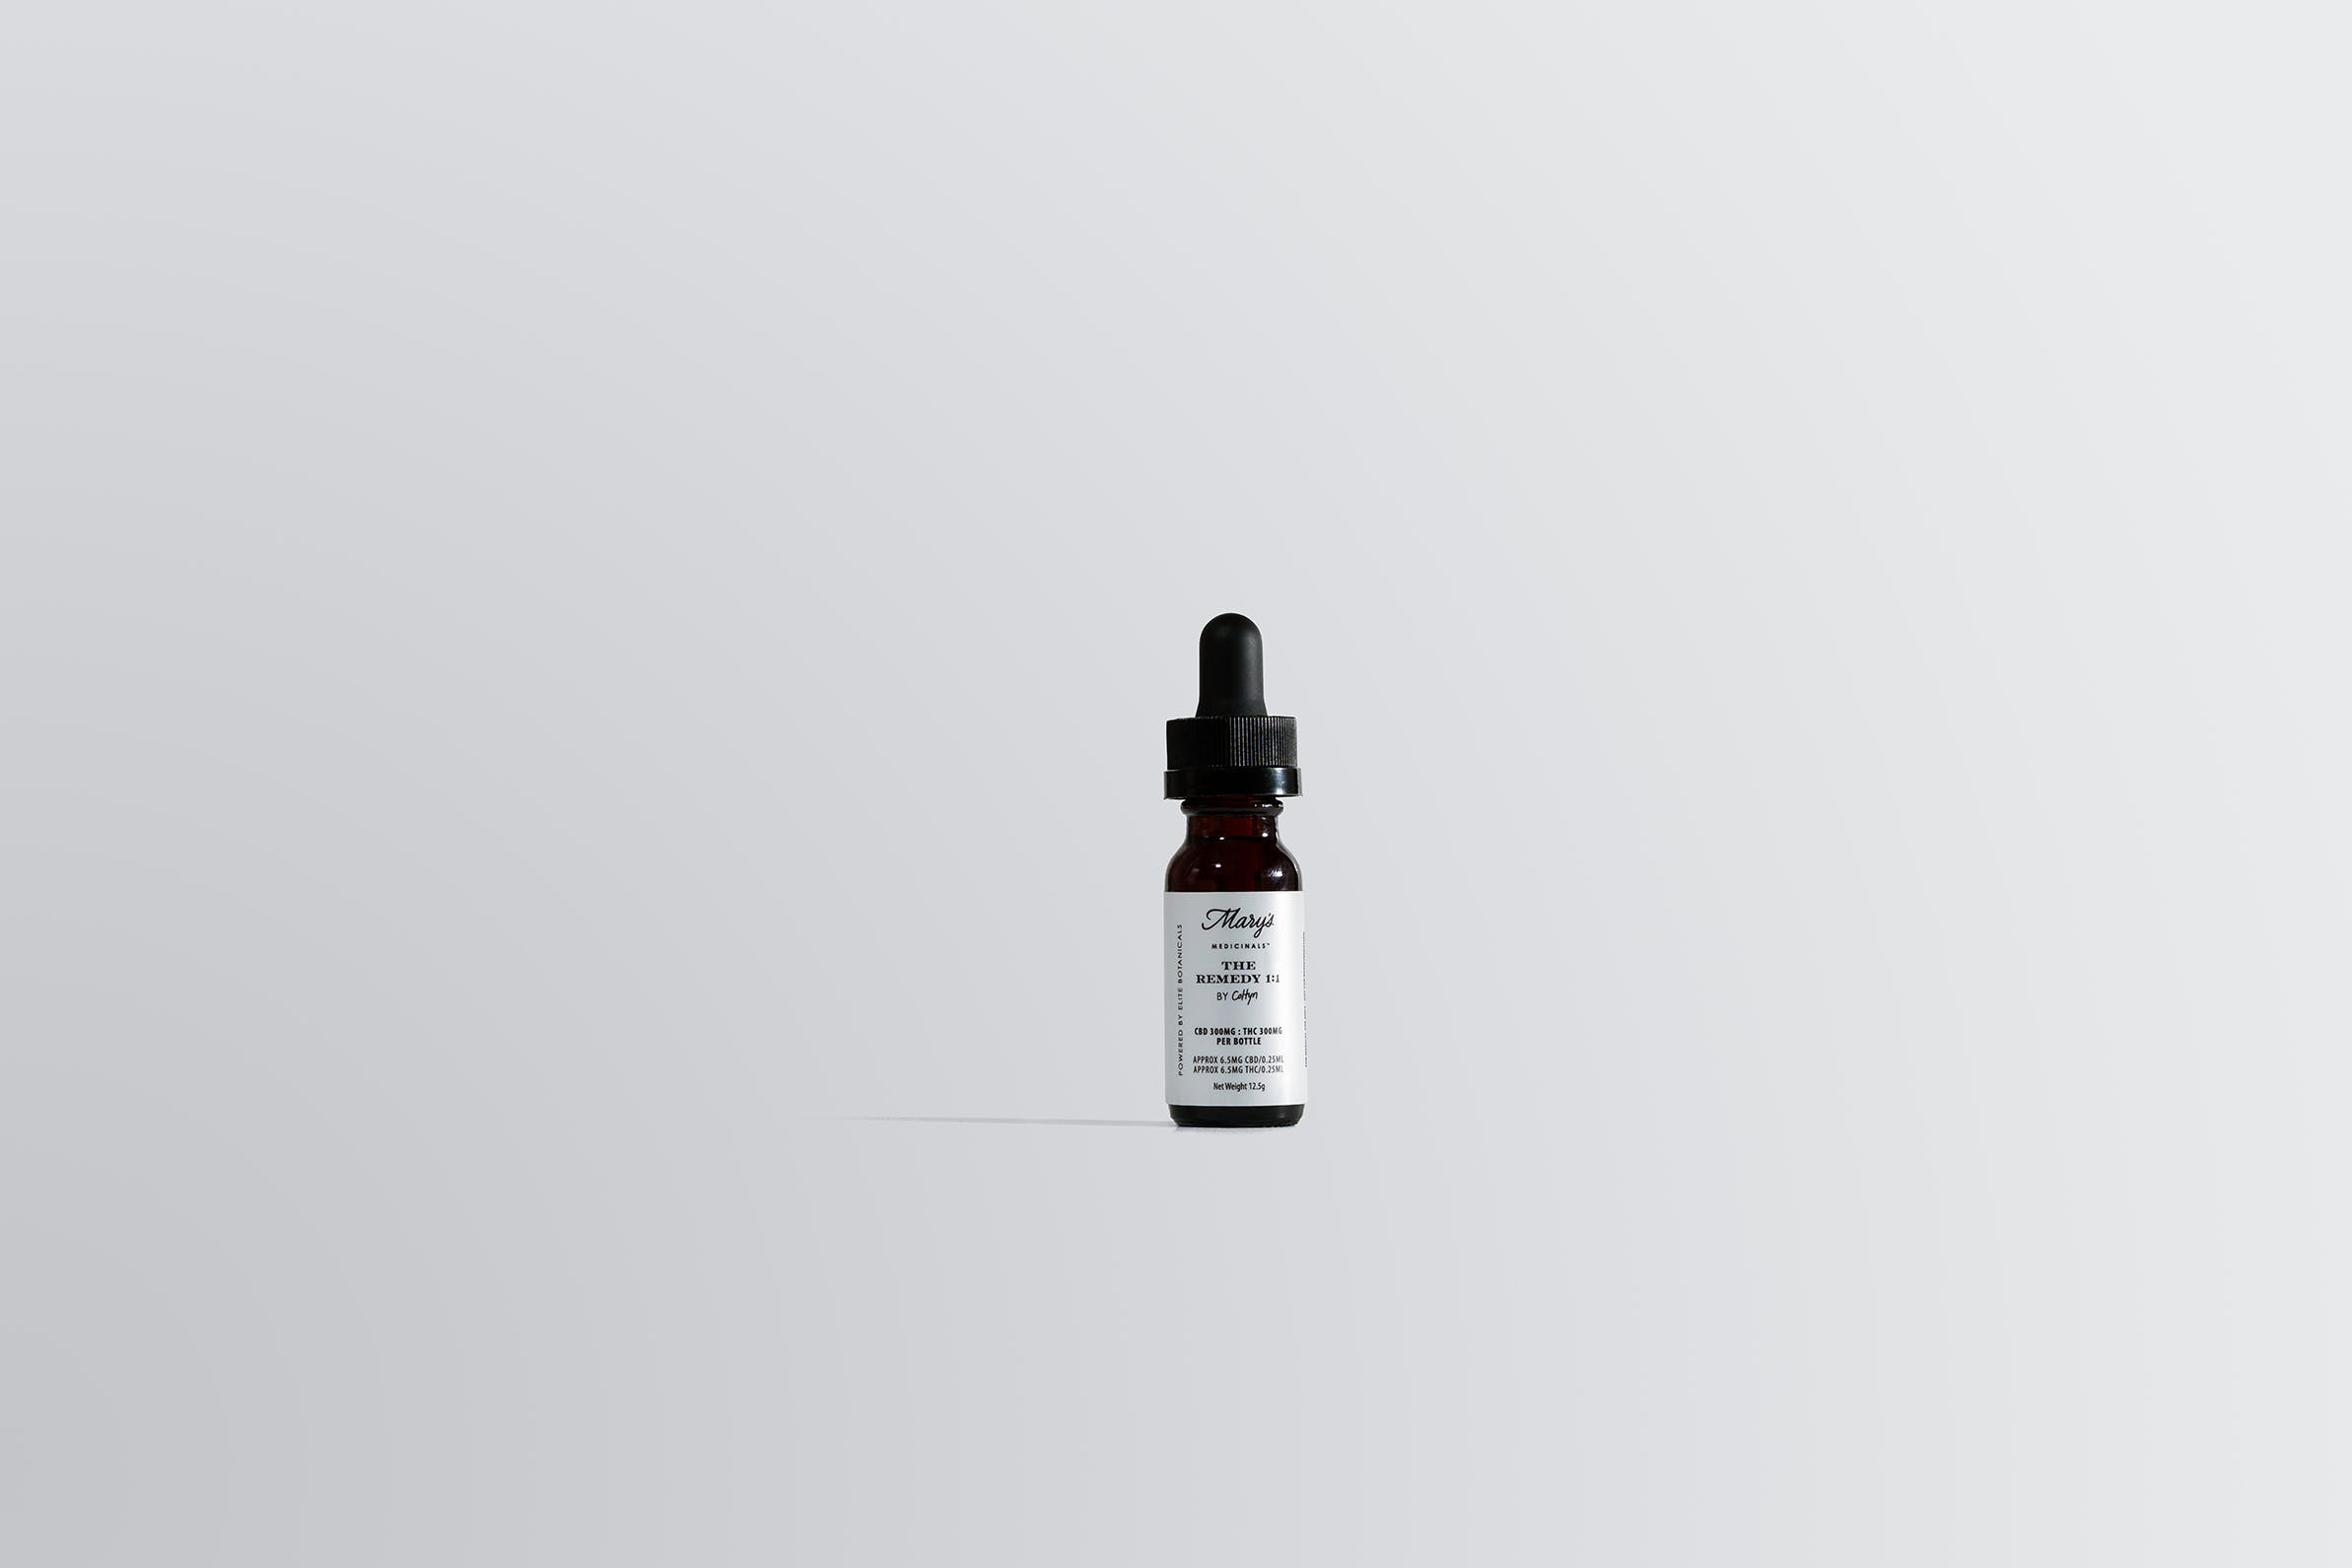 Mary's Medicinals The Remedy 1:1 Tincture